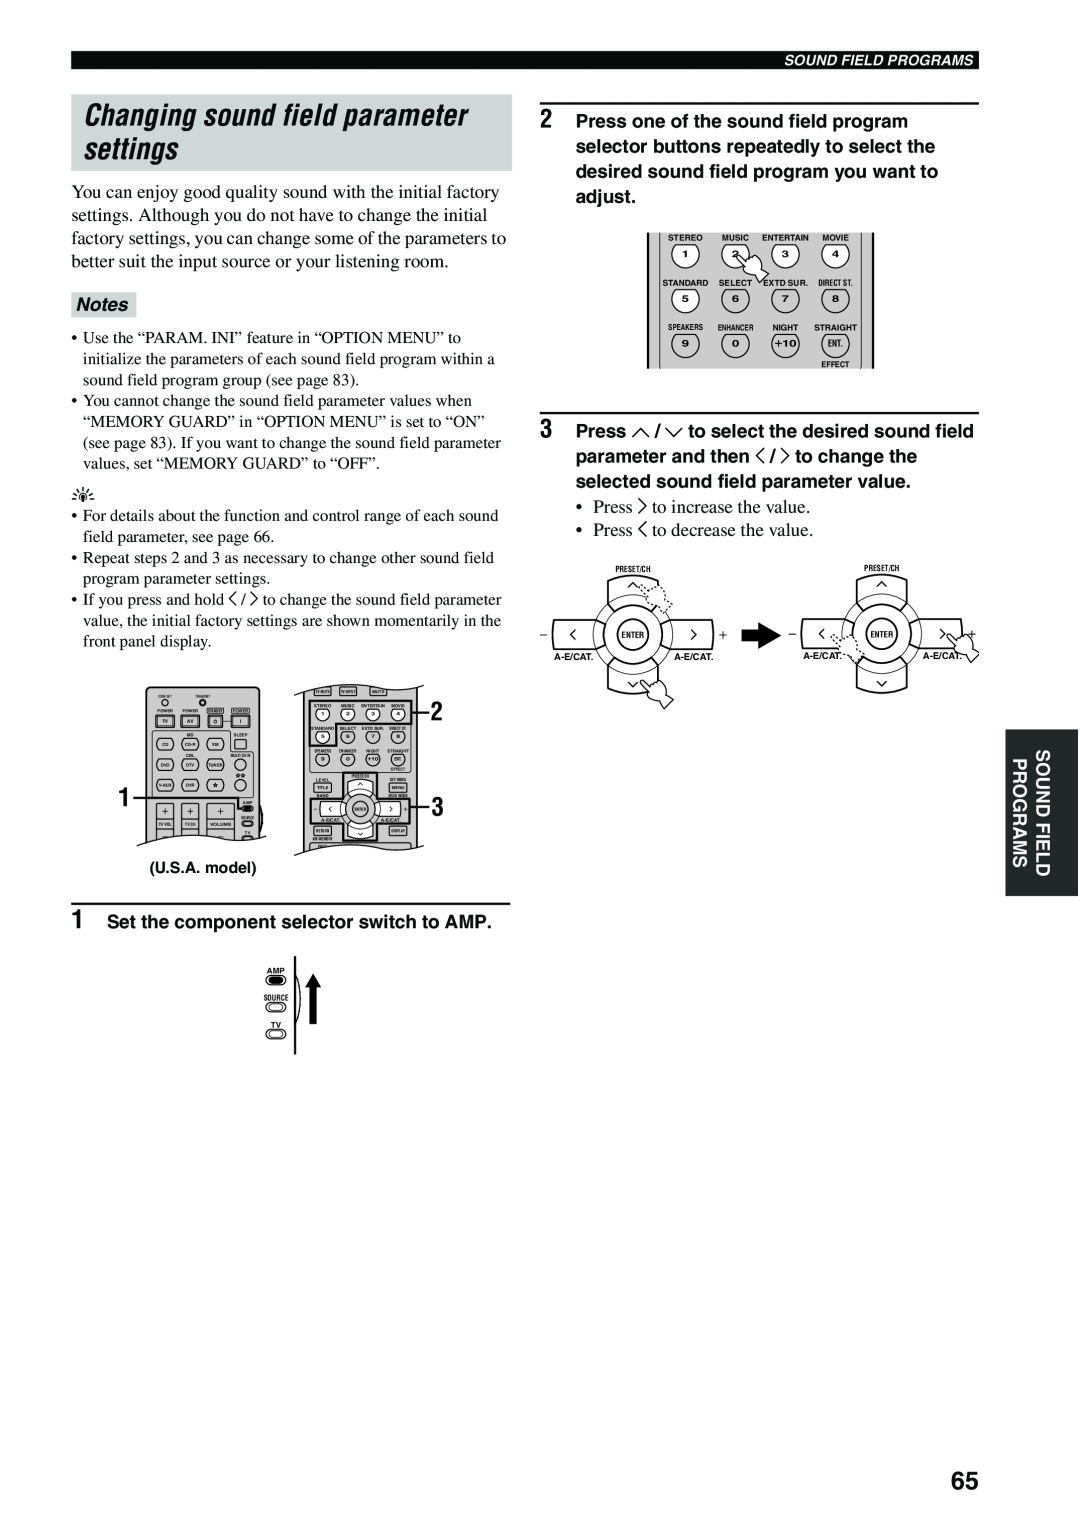 Yamaha HTR-5940 owner manual Changing sound field parameter settings, Notes 